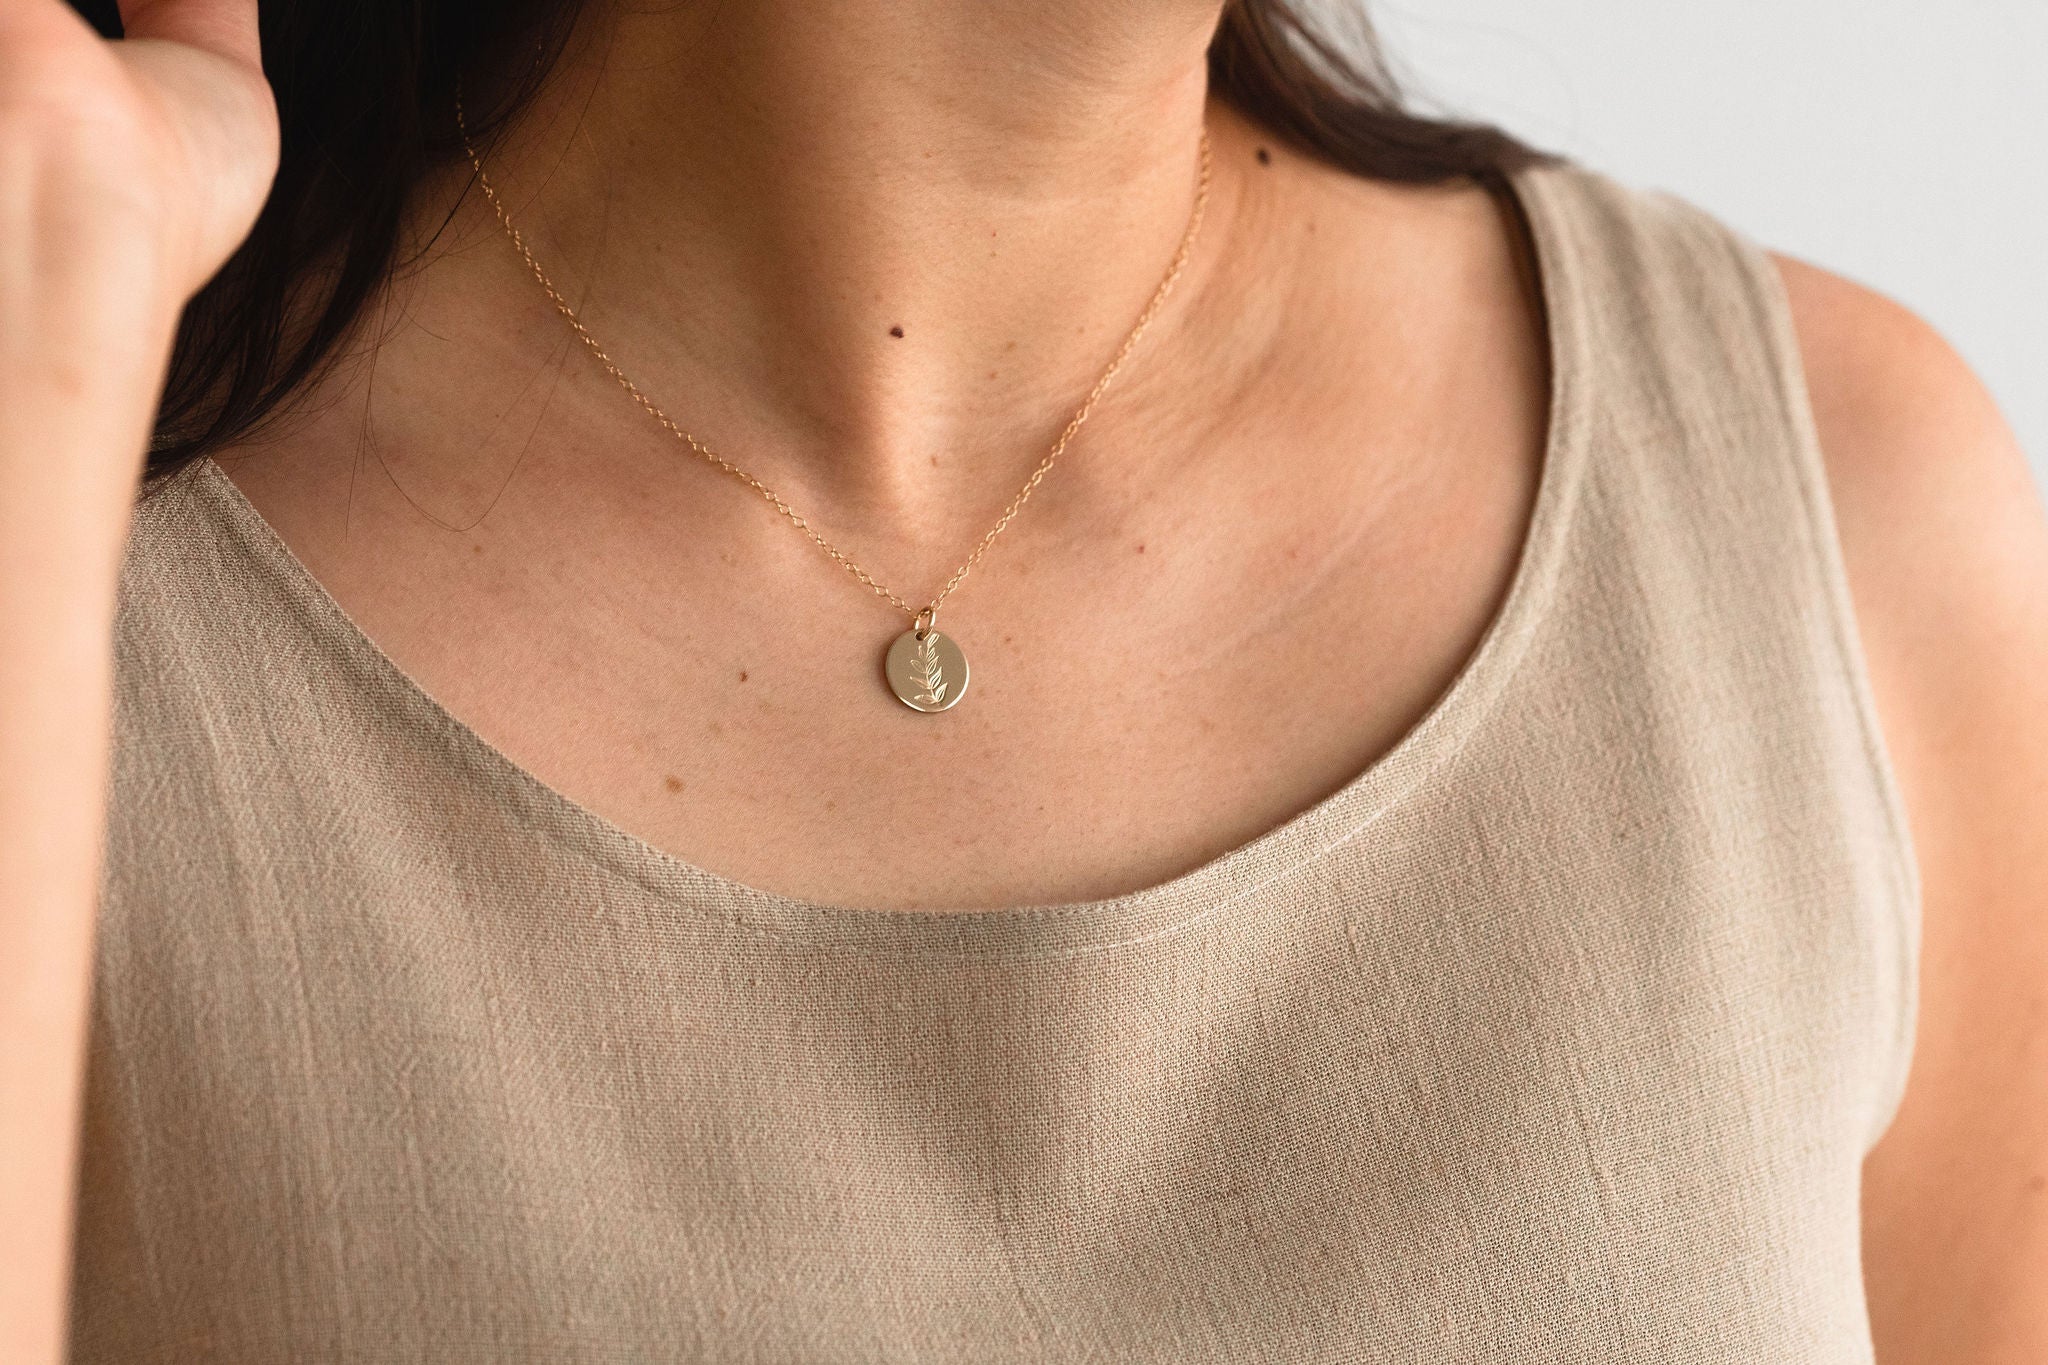 Hygge Bloom Necklace - Sheena Marshall